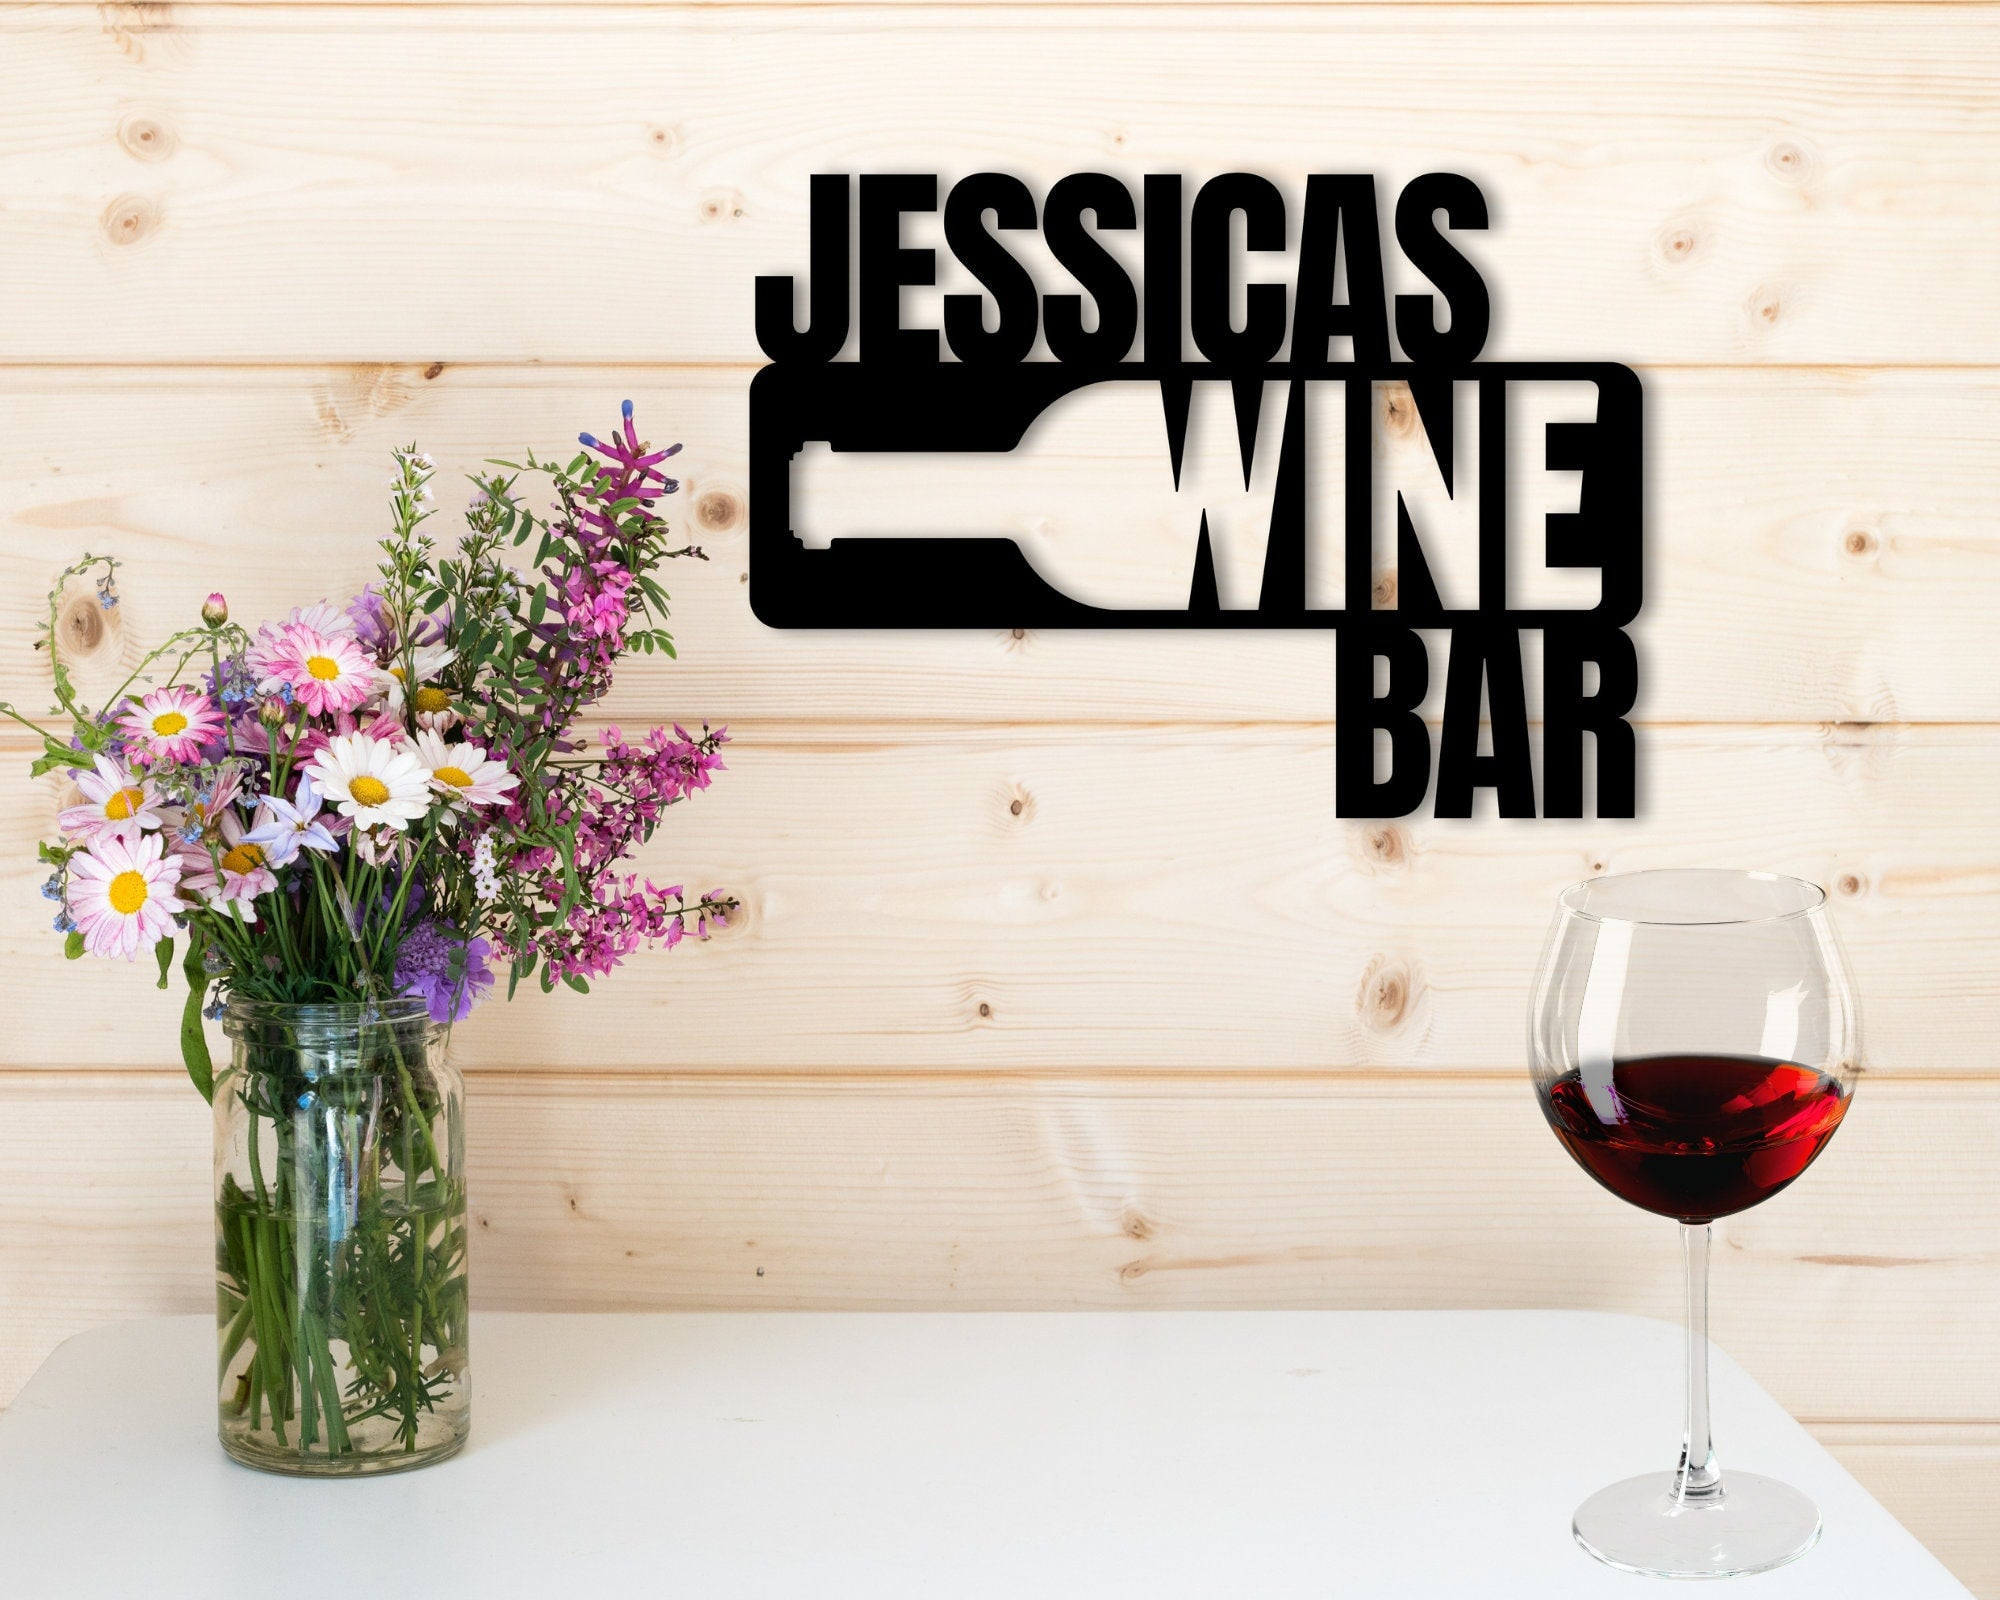 Personalized Bar Sign, Wine Decor, Wine Bar Sign, Mother's Day Gift, Wine Gifts, Wine Sign, Wine Bar Metal Wall Sign, Wine Glass Home Decor, Laser Cut Metal Signs Custom Gift Ideas 14x14IN